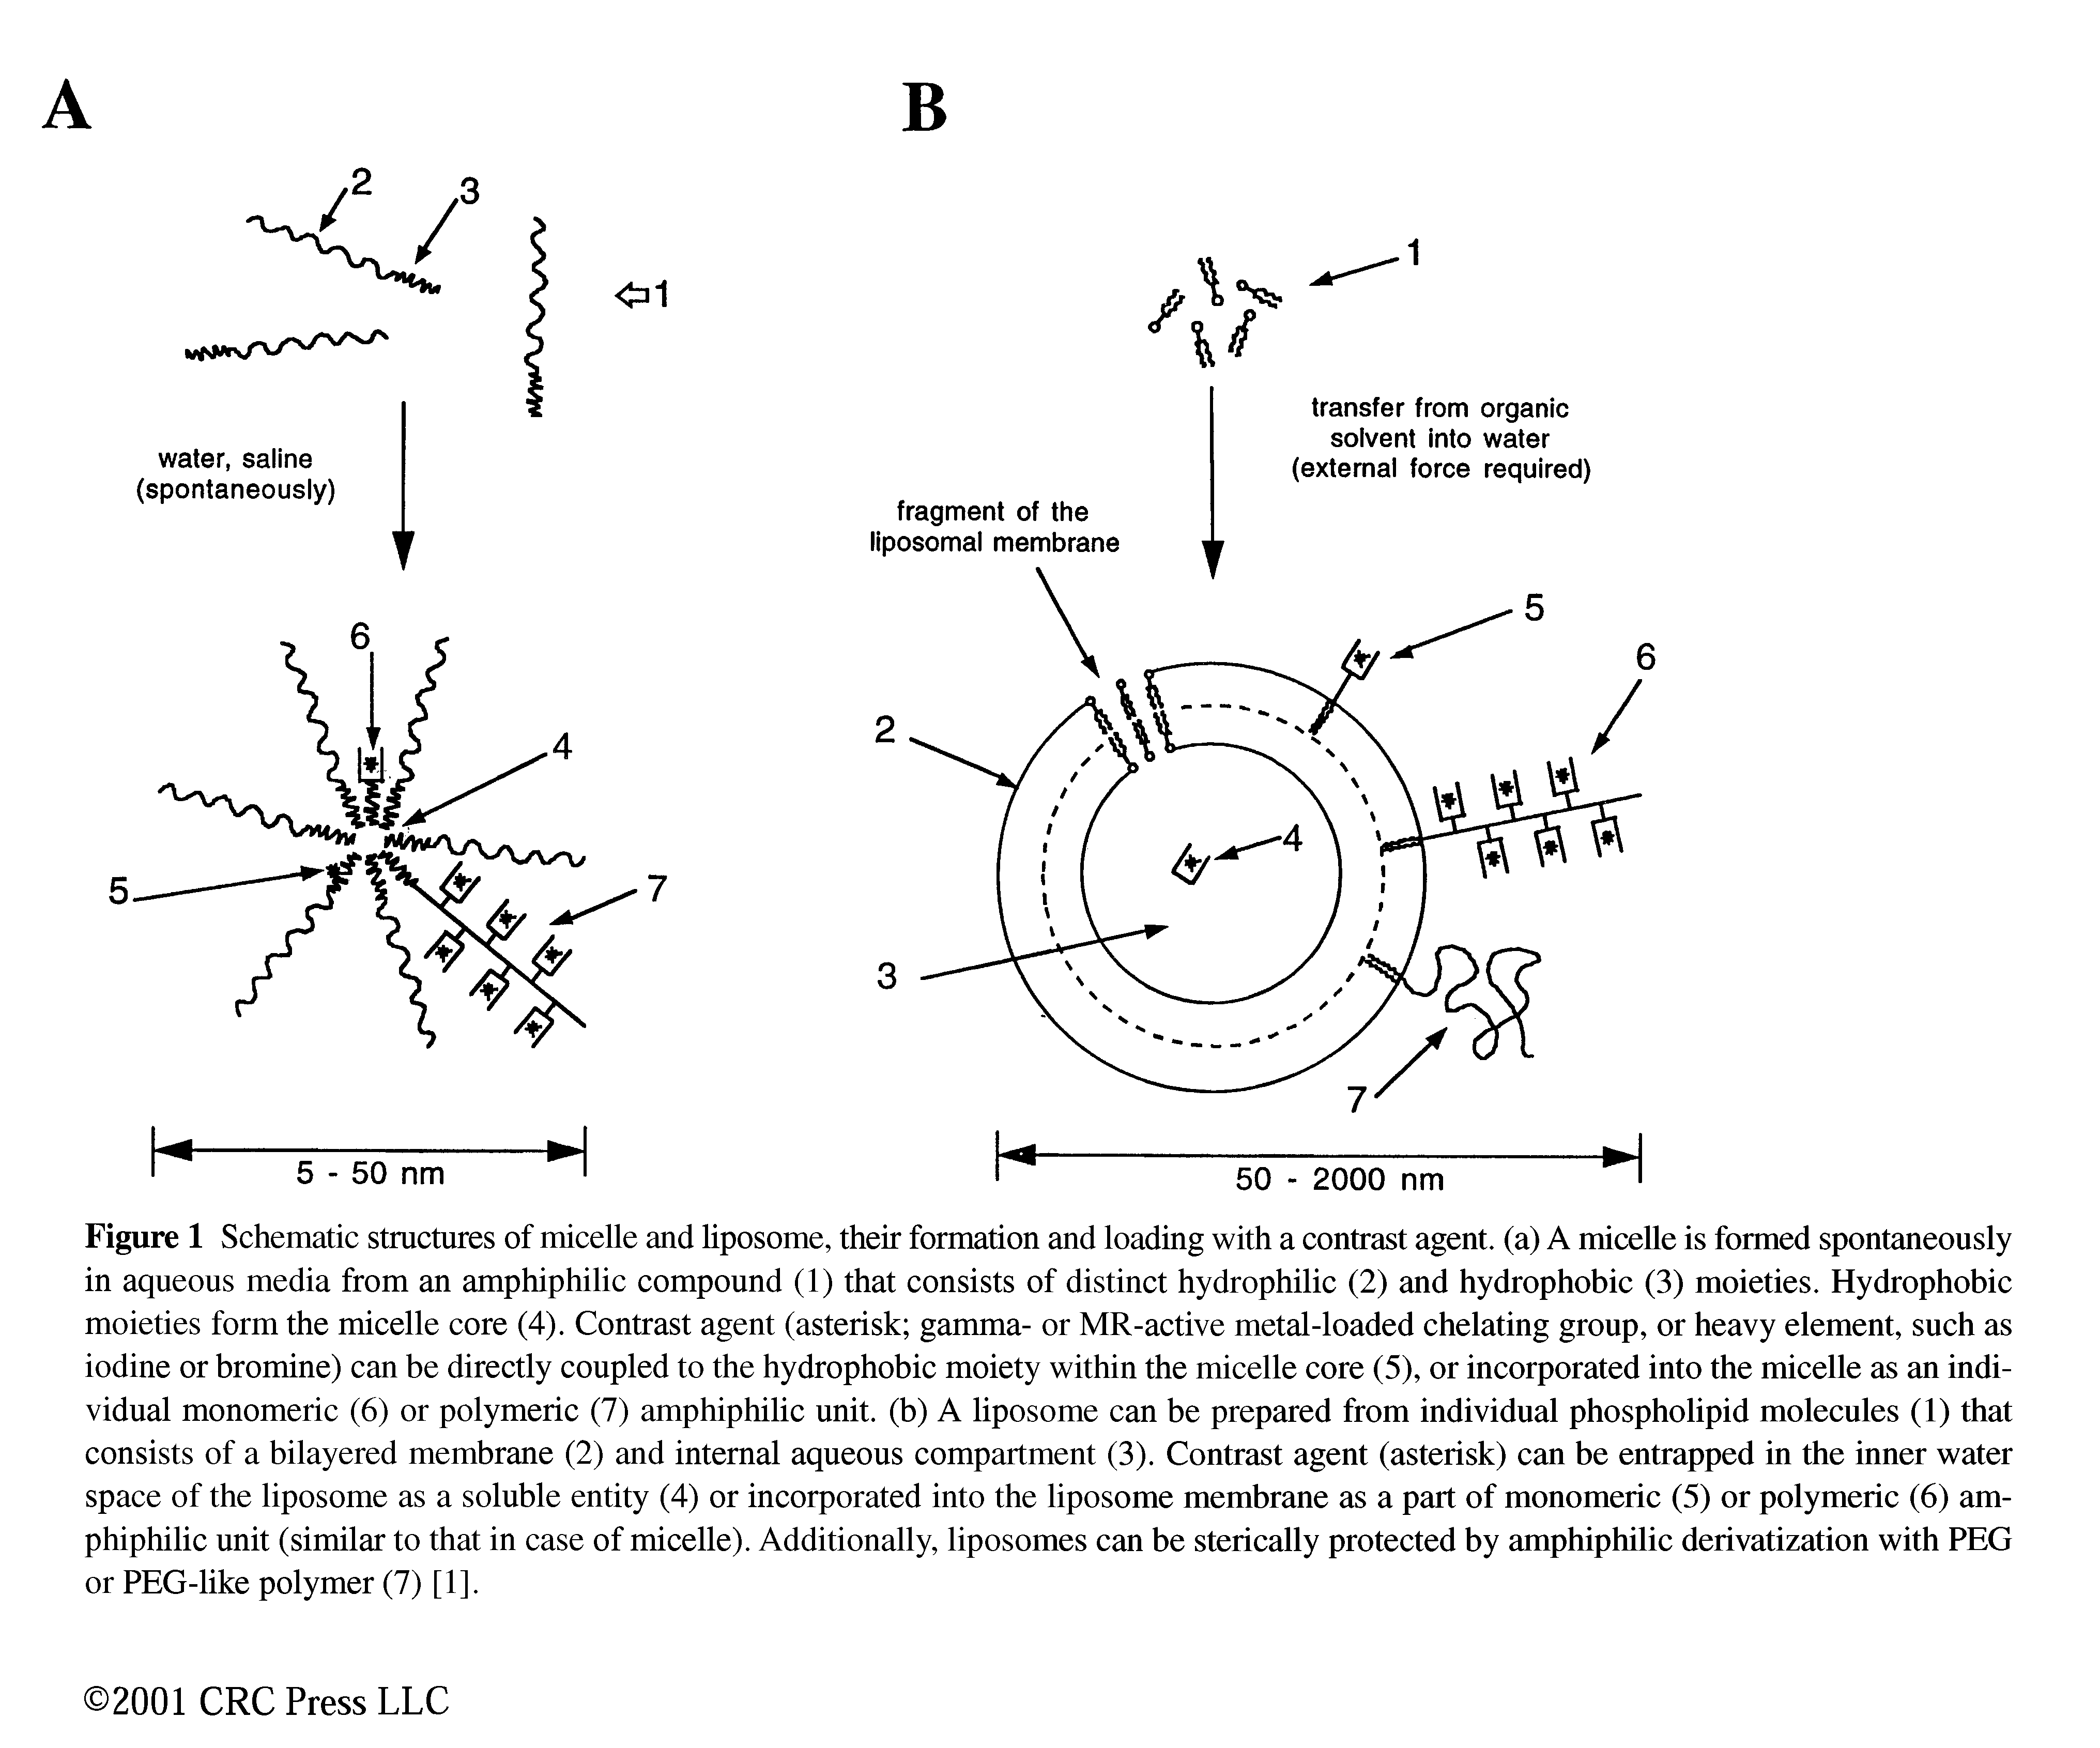 Figure 1 Schematic structures of micelle and liposome, their formation and loading with a contrast agent, (a) A micelle is formed spontaneously in aqueous media from an amphiphilic compound (1) that consists of distinct hydrophilic (2) and hydrophobic (3) moieties. Hydrophobic moieties form the micelle core (4). Contrast agent (asterisk gamma- or MR-active metal-loaded chelating group, or heavy element, such as iodine or bromine) can be directly coupled to the hydrophobic moiety within the micelle core (5), or incorporated into the micelle as an individual monomeric (6) or polymeric (7) amphiphilic unit, (b) A liposome can be prepared from individual phospholipid molecules (1) that consists of a bilayered membrane (2) and internal aqueous compartment (3). Contrast agent (asterisk) can be entrapped in the inner water space of the liposome as a soluble entity (4) or incorporated into the liposome membrane as a part of monomeric (5) or polymeric (6) amphiphilic unit (similar to that in case of micelle). Additionally, liposomes can be sterically protected by amphiphilic derivatization with PEG or PEG-like polymer (7) [1].